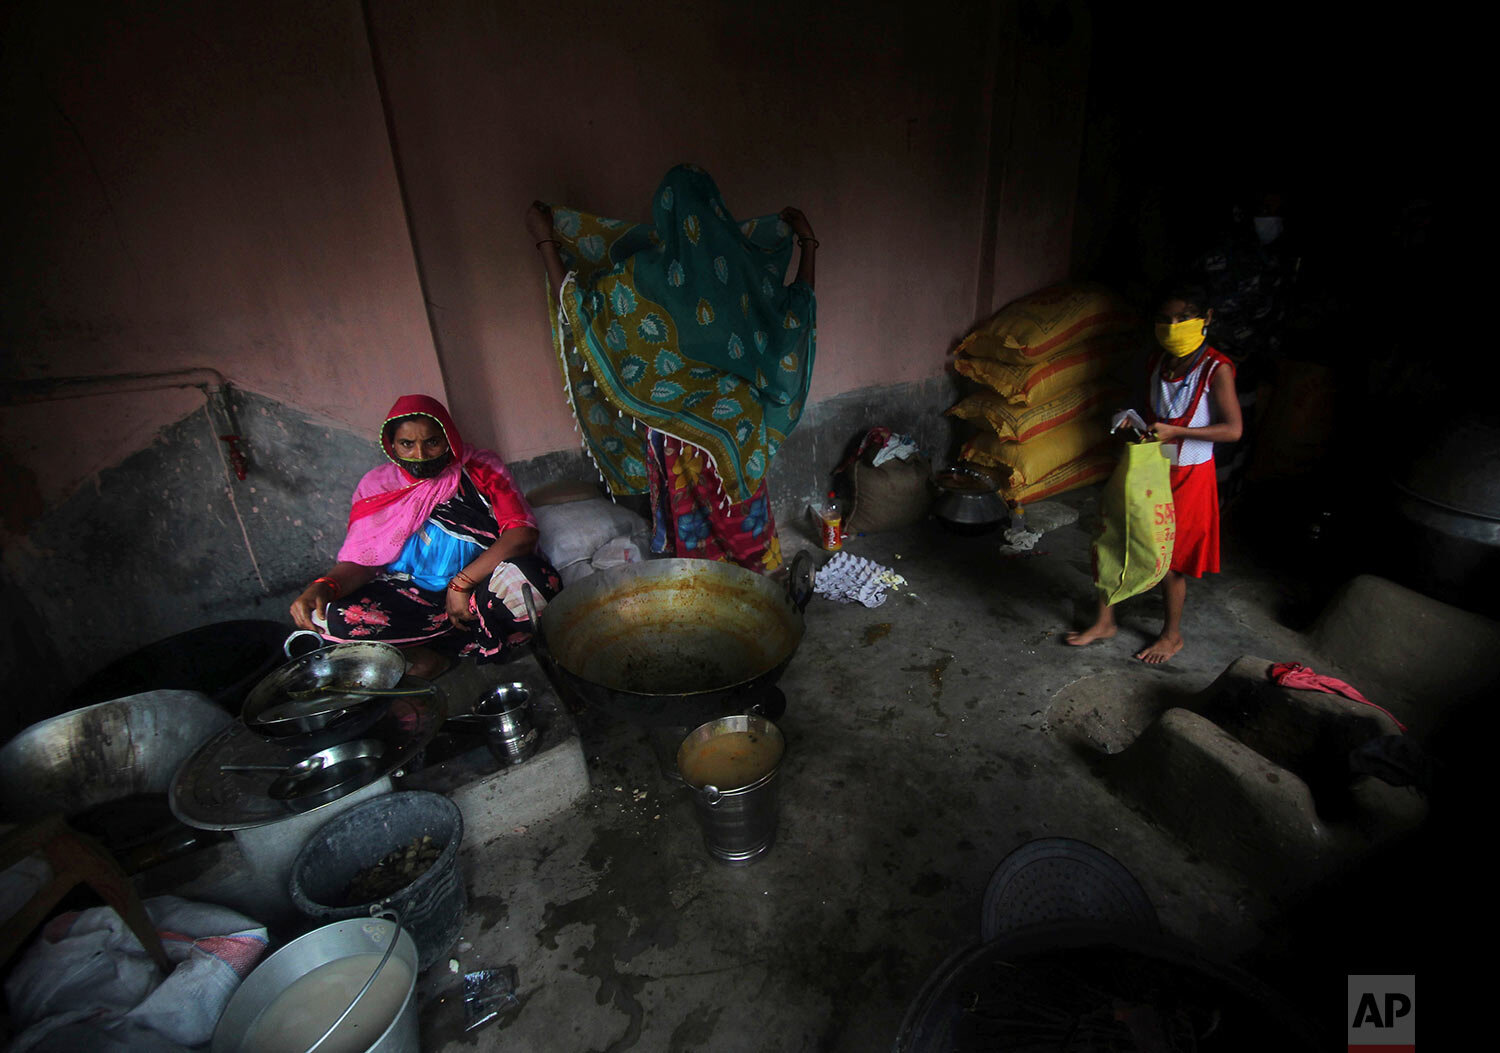  Village women who have taken refuge at a cyclone shelter prepare a meal in Balasore district in Odisha, India, Tuesday, May 25, 2021. (AP Photo) 